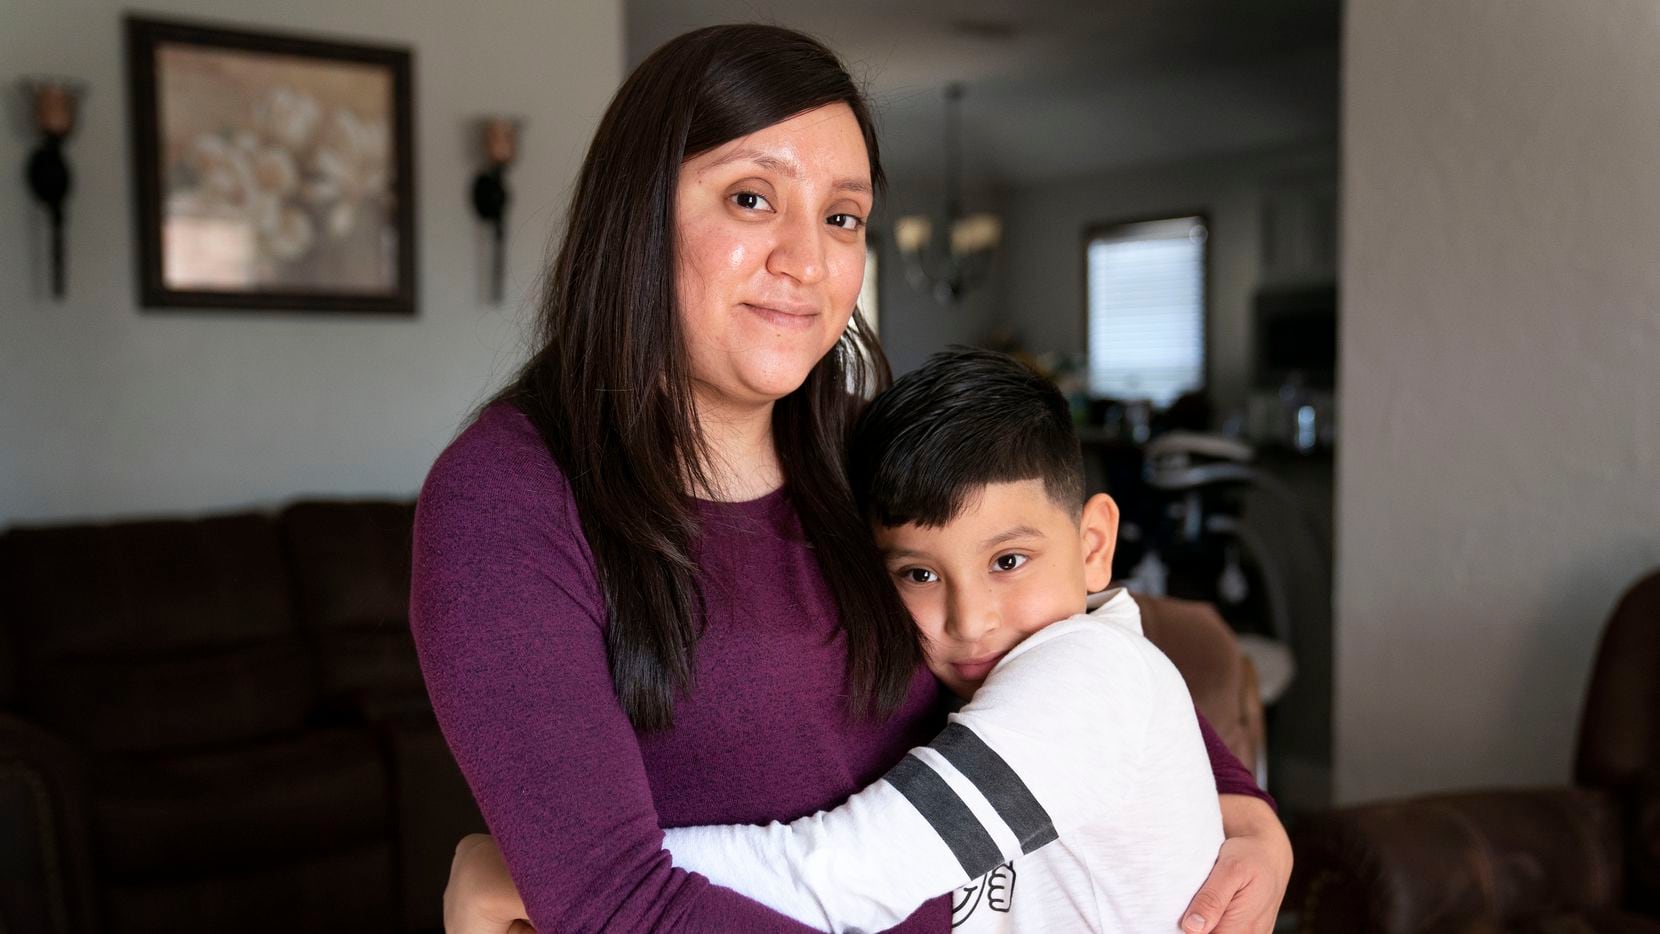 Cynthia Medina, 27, poses for a portrait with her son Aaron Villegas, 8, at her home in West...